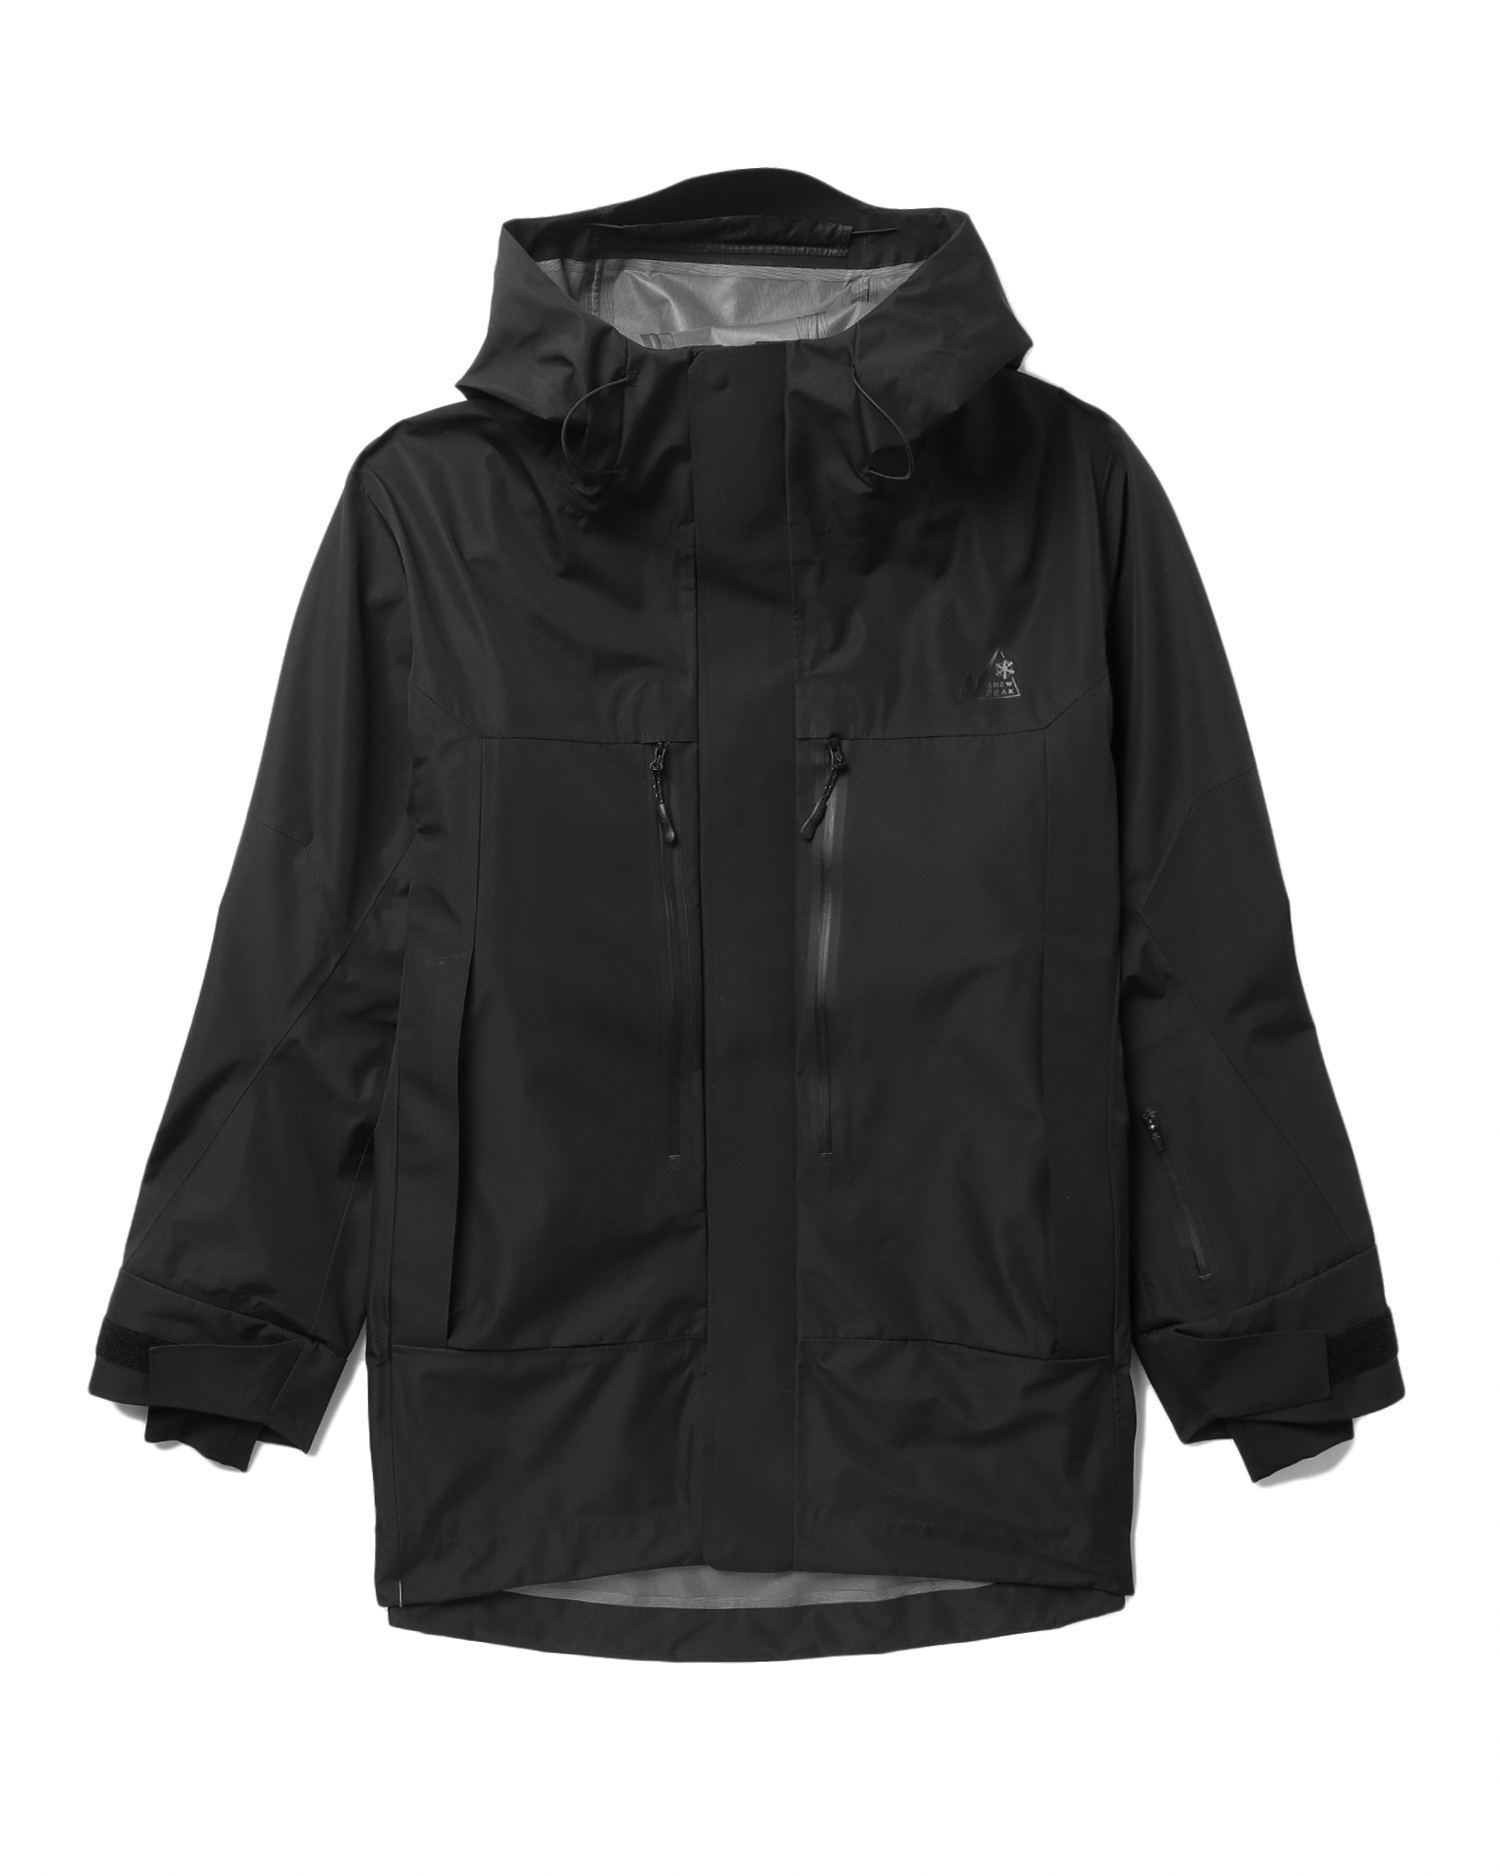 X Mountain of Moods 3L graphen jacket